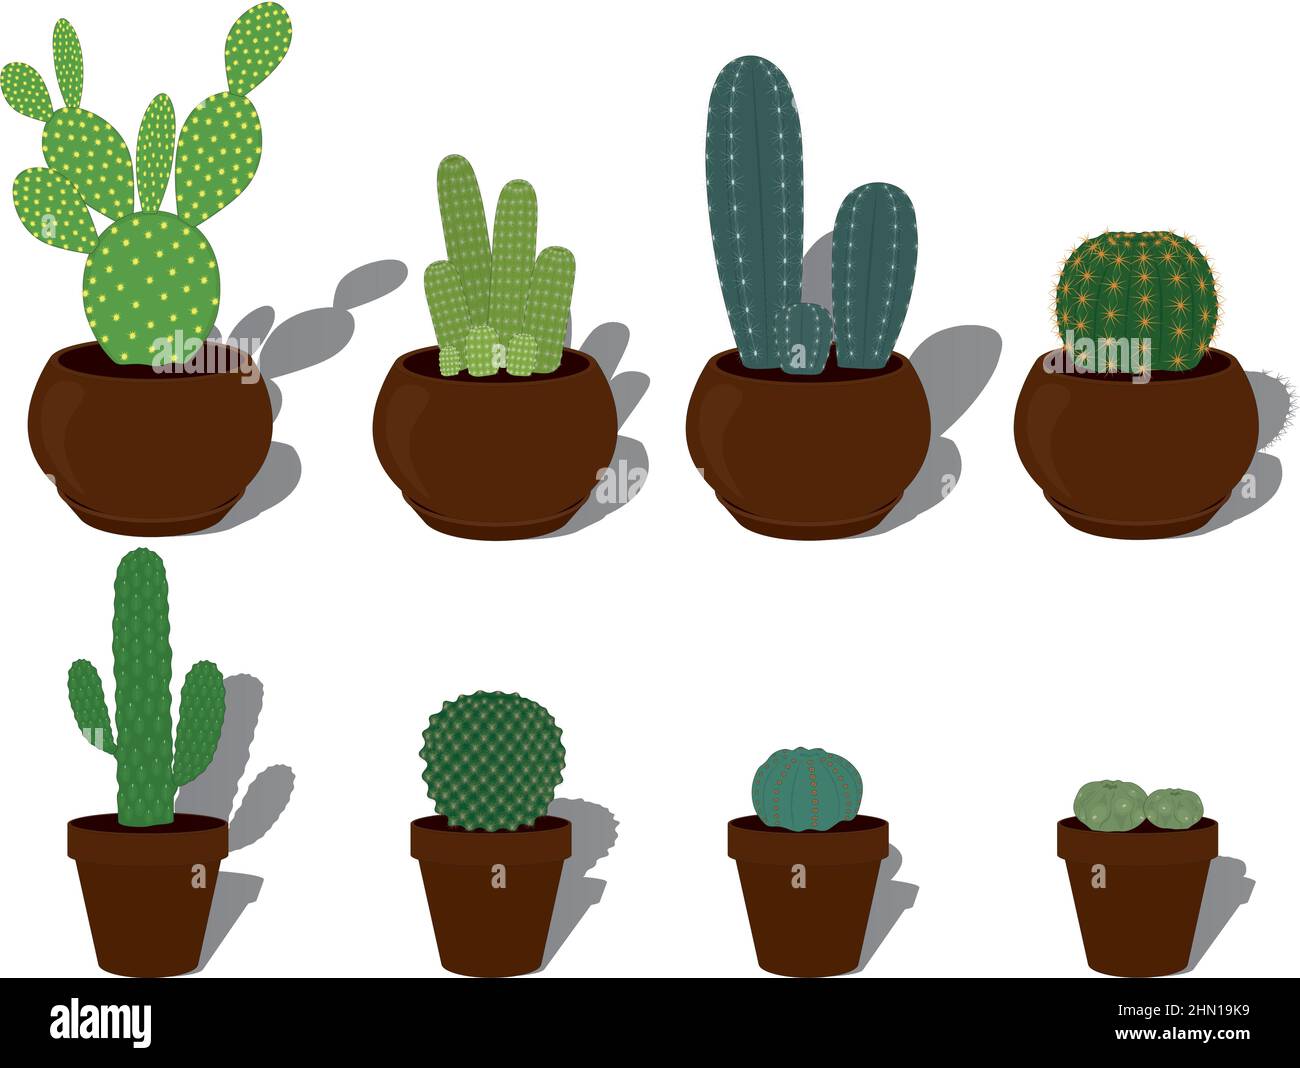 Cactus types collection in terracotta plant pots vector illustration Stock Vector